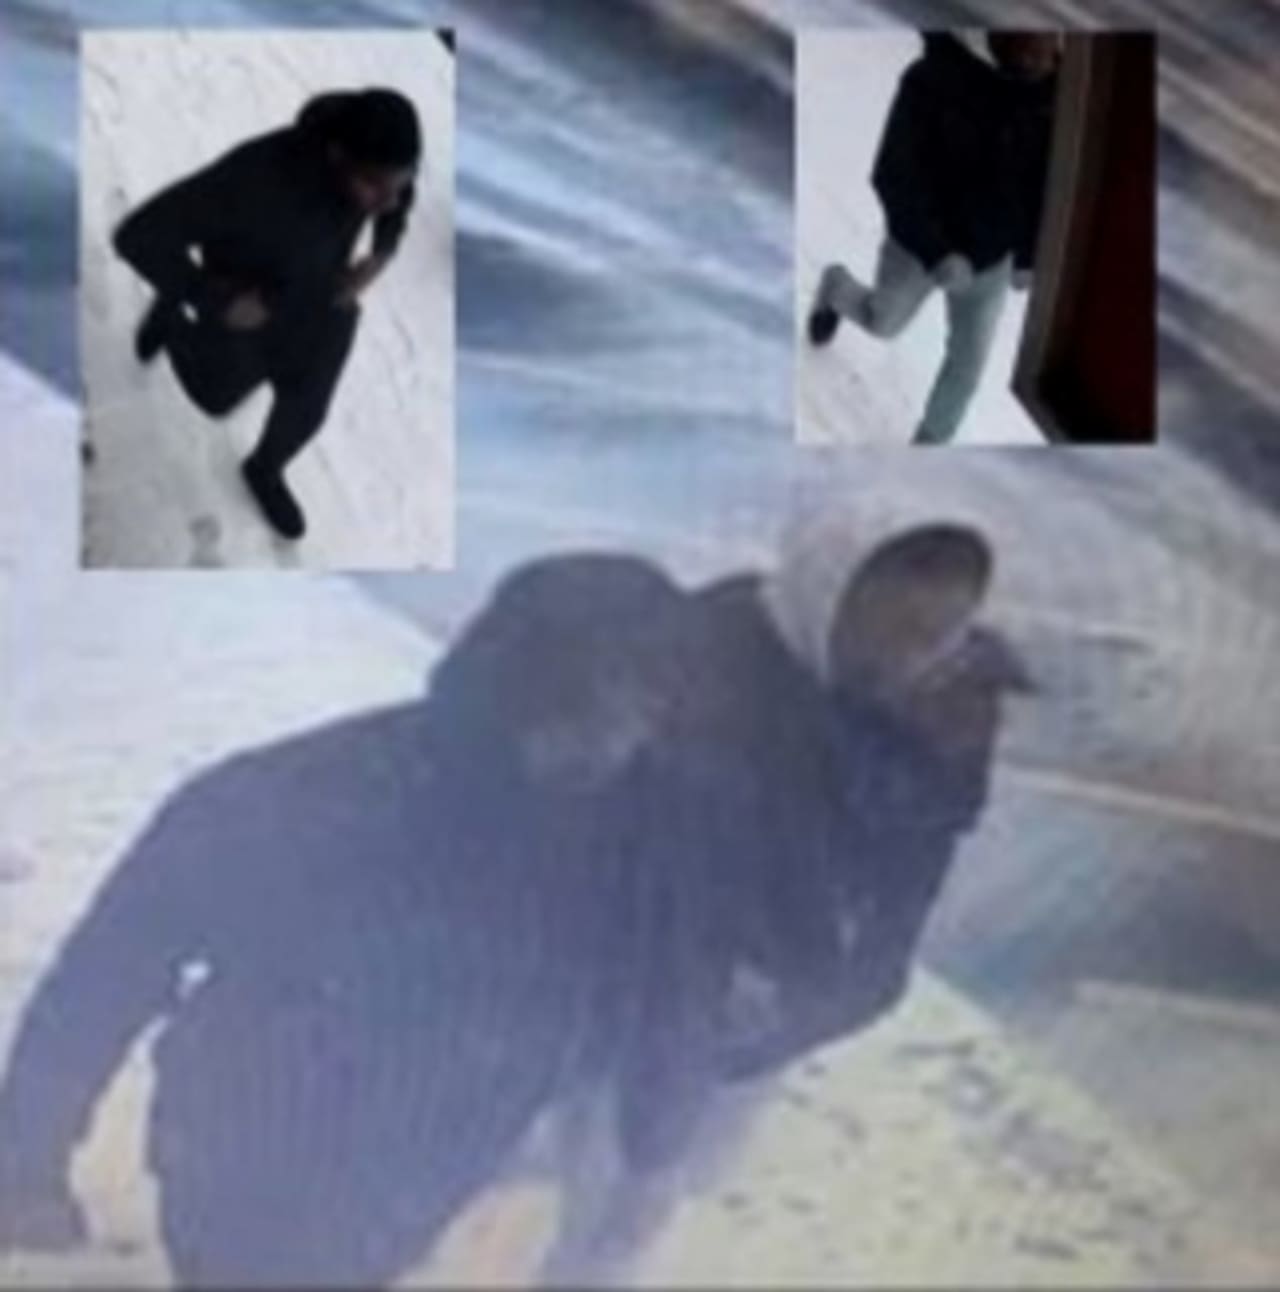 Two individuals stole personal property from a victim near 2 Park Place on Jan. 18, police say.